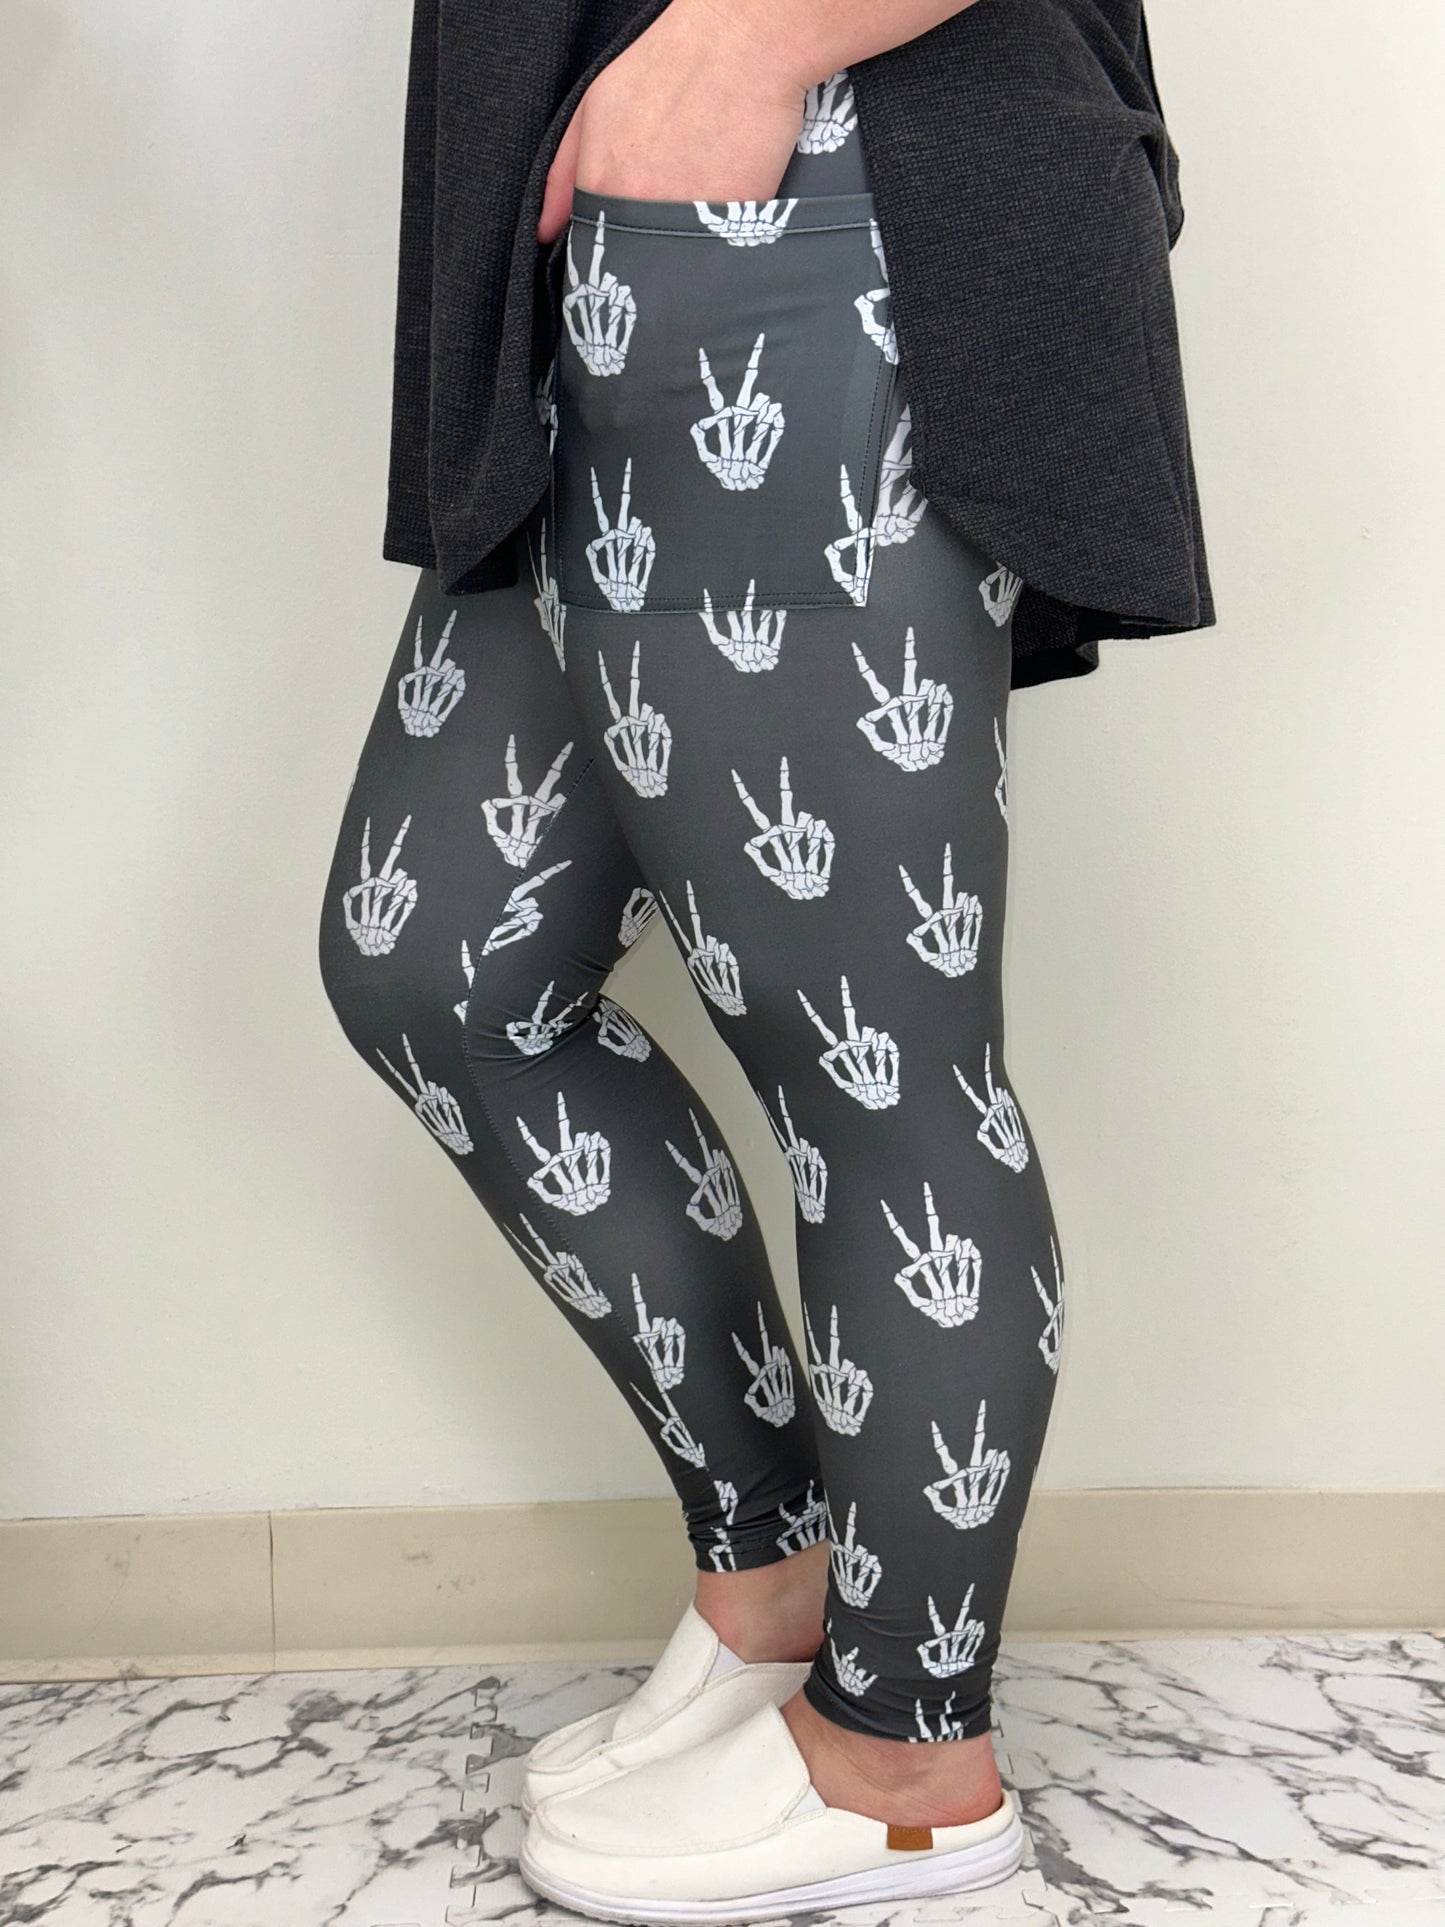 Skelly Peace Leggings w/ Pockets - Three Bears Boutique